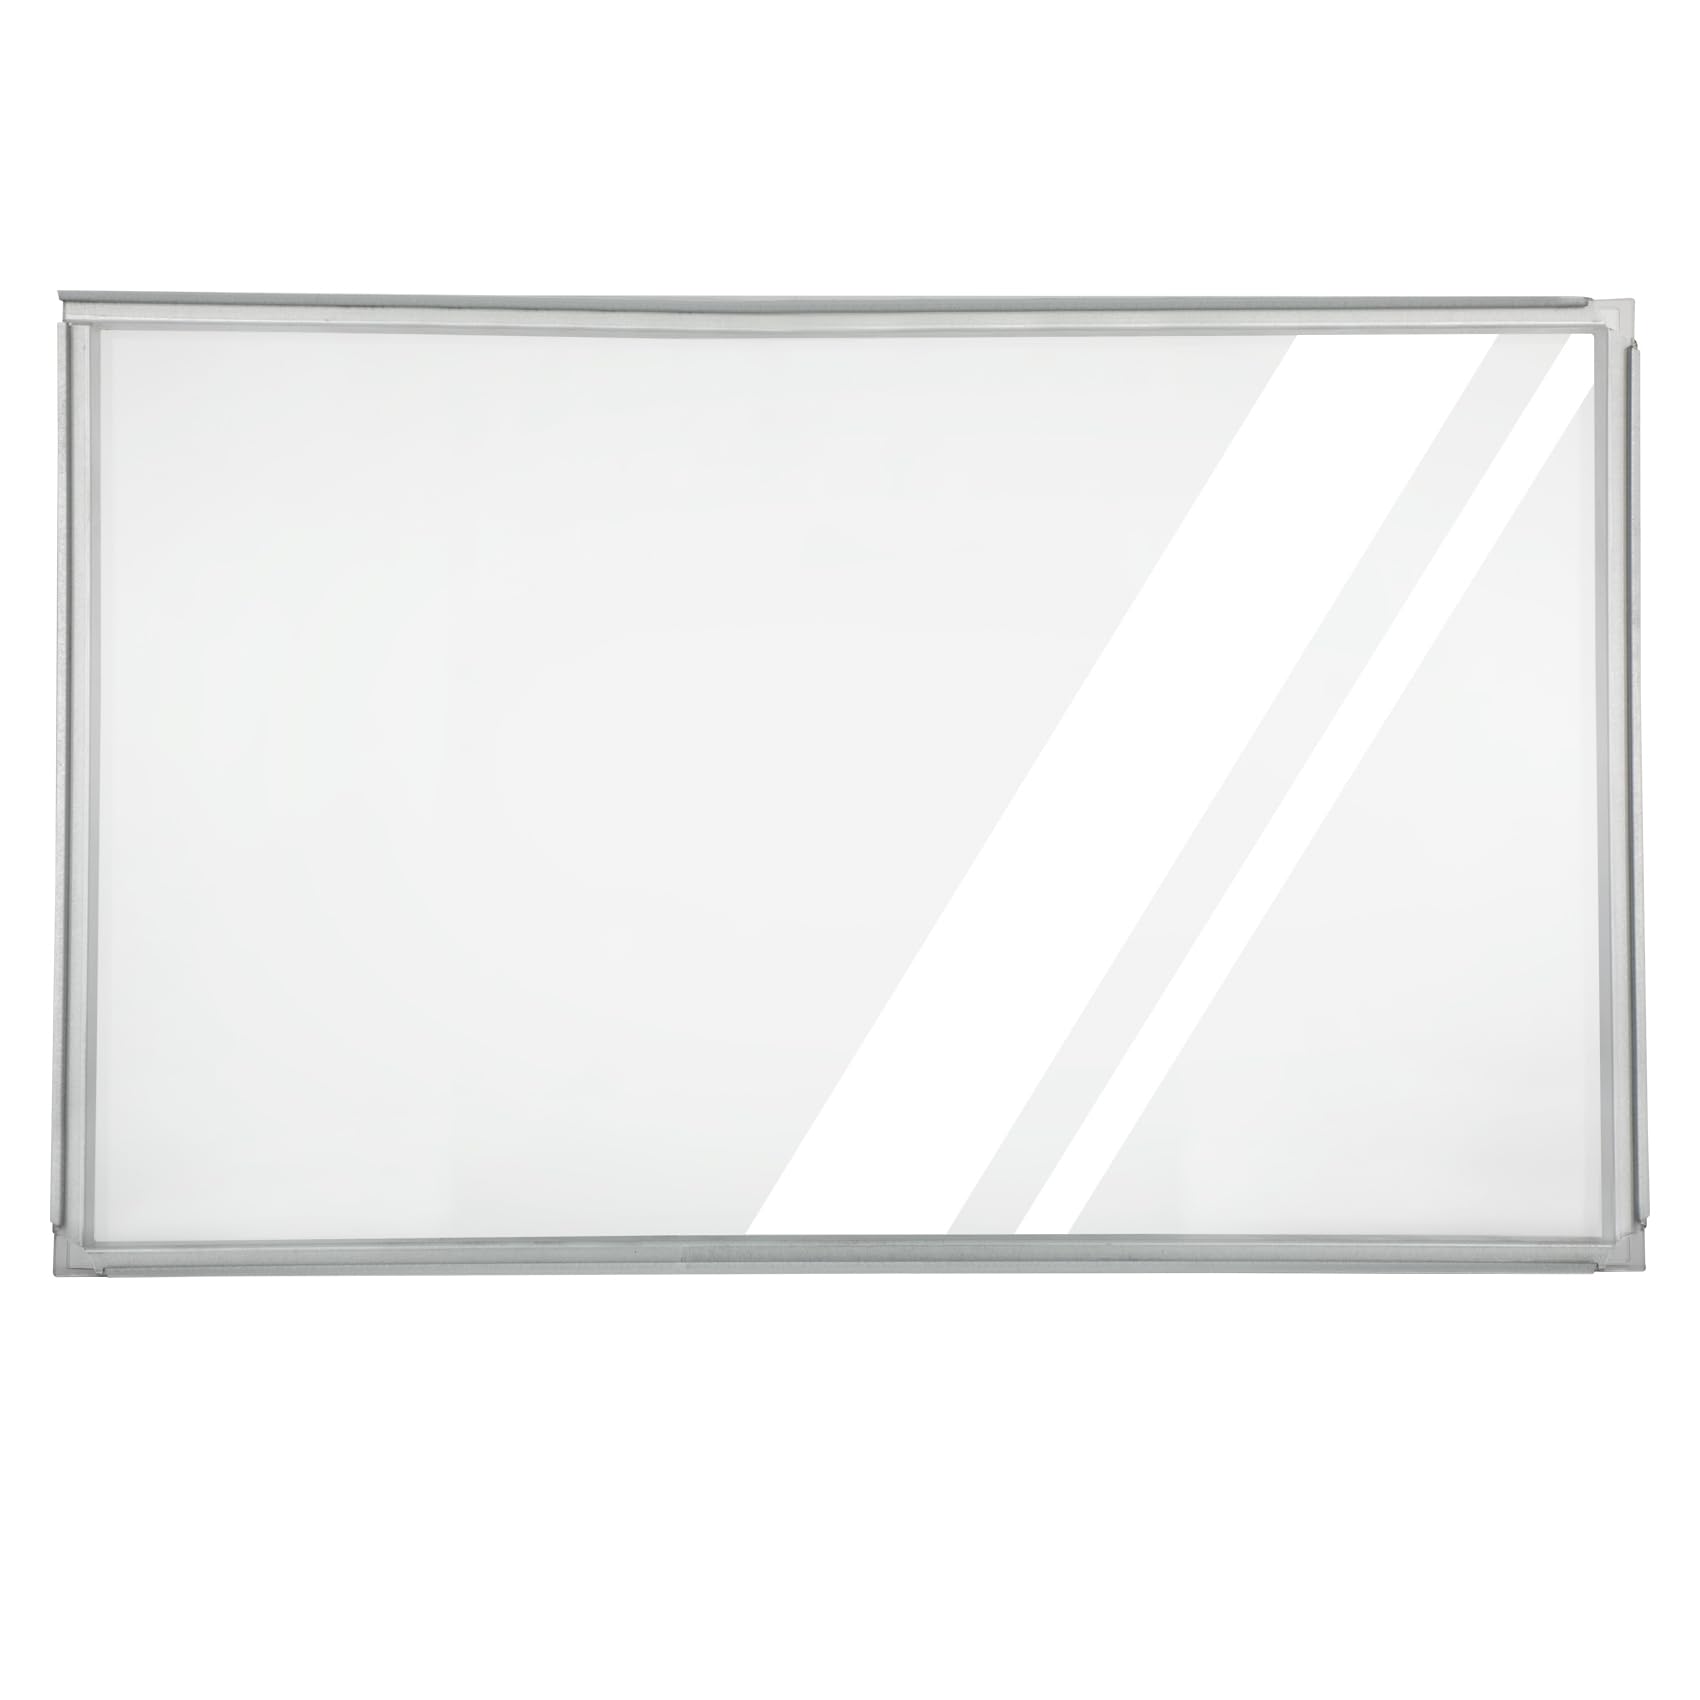 GE-Range-Oven-Door-Inner-Glass-replaces-WB55T10154-WB56T10152-WB56X26391-WB56X22160